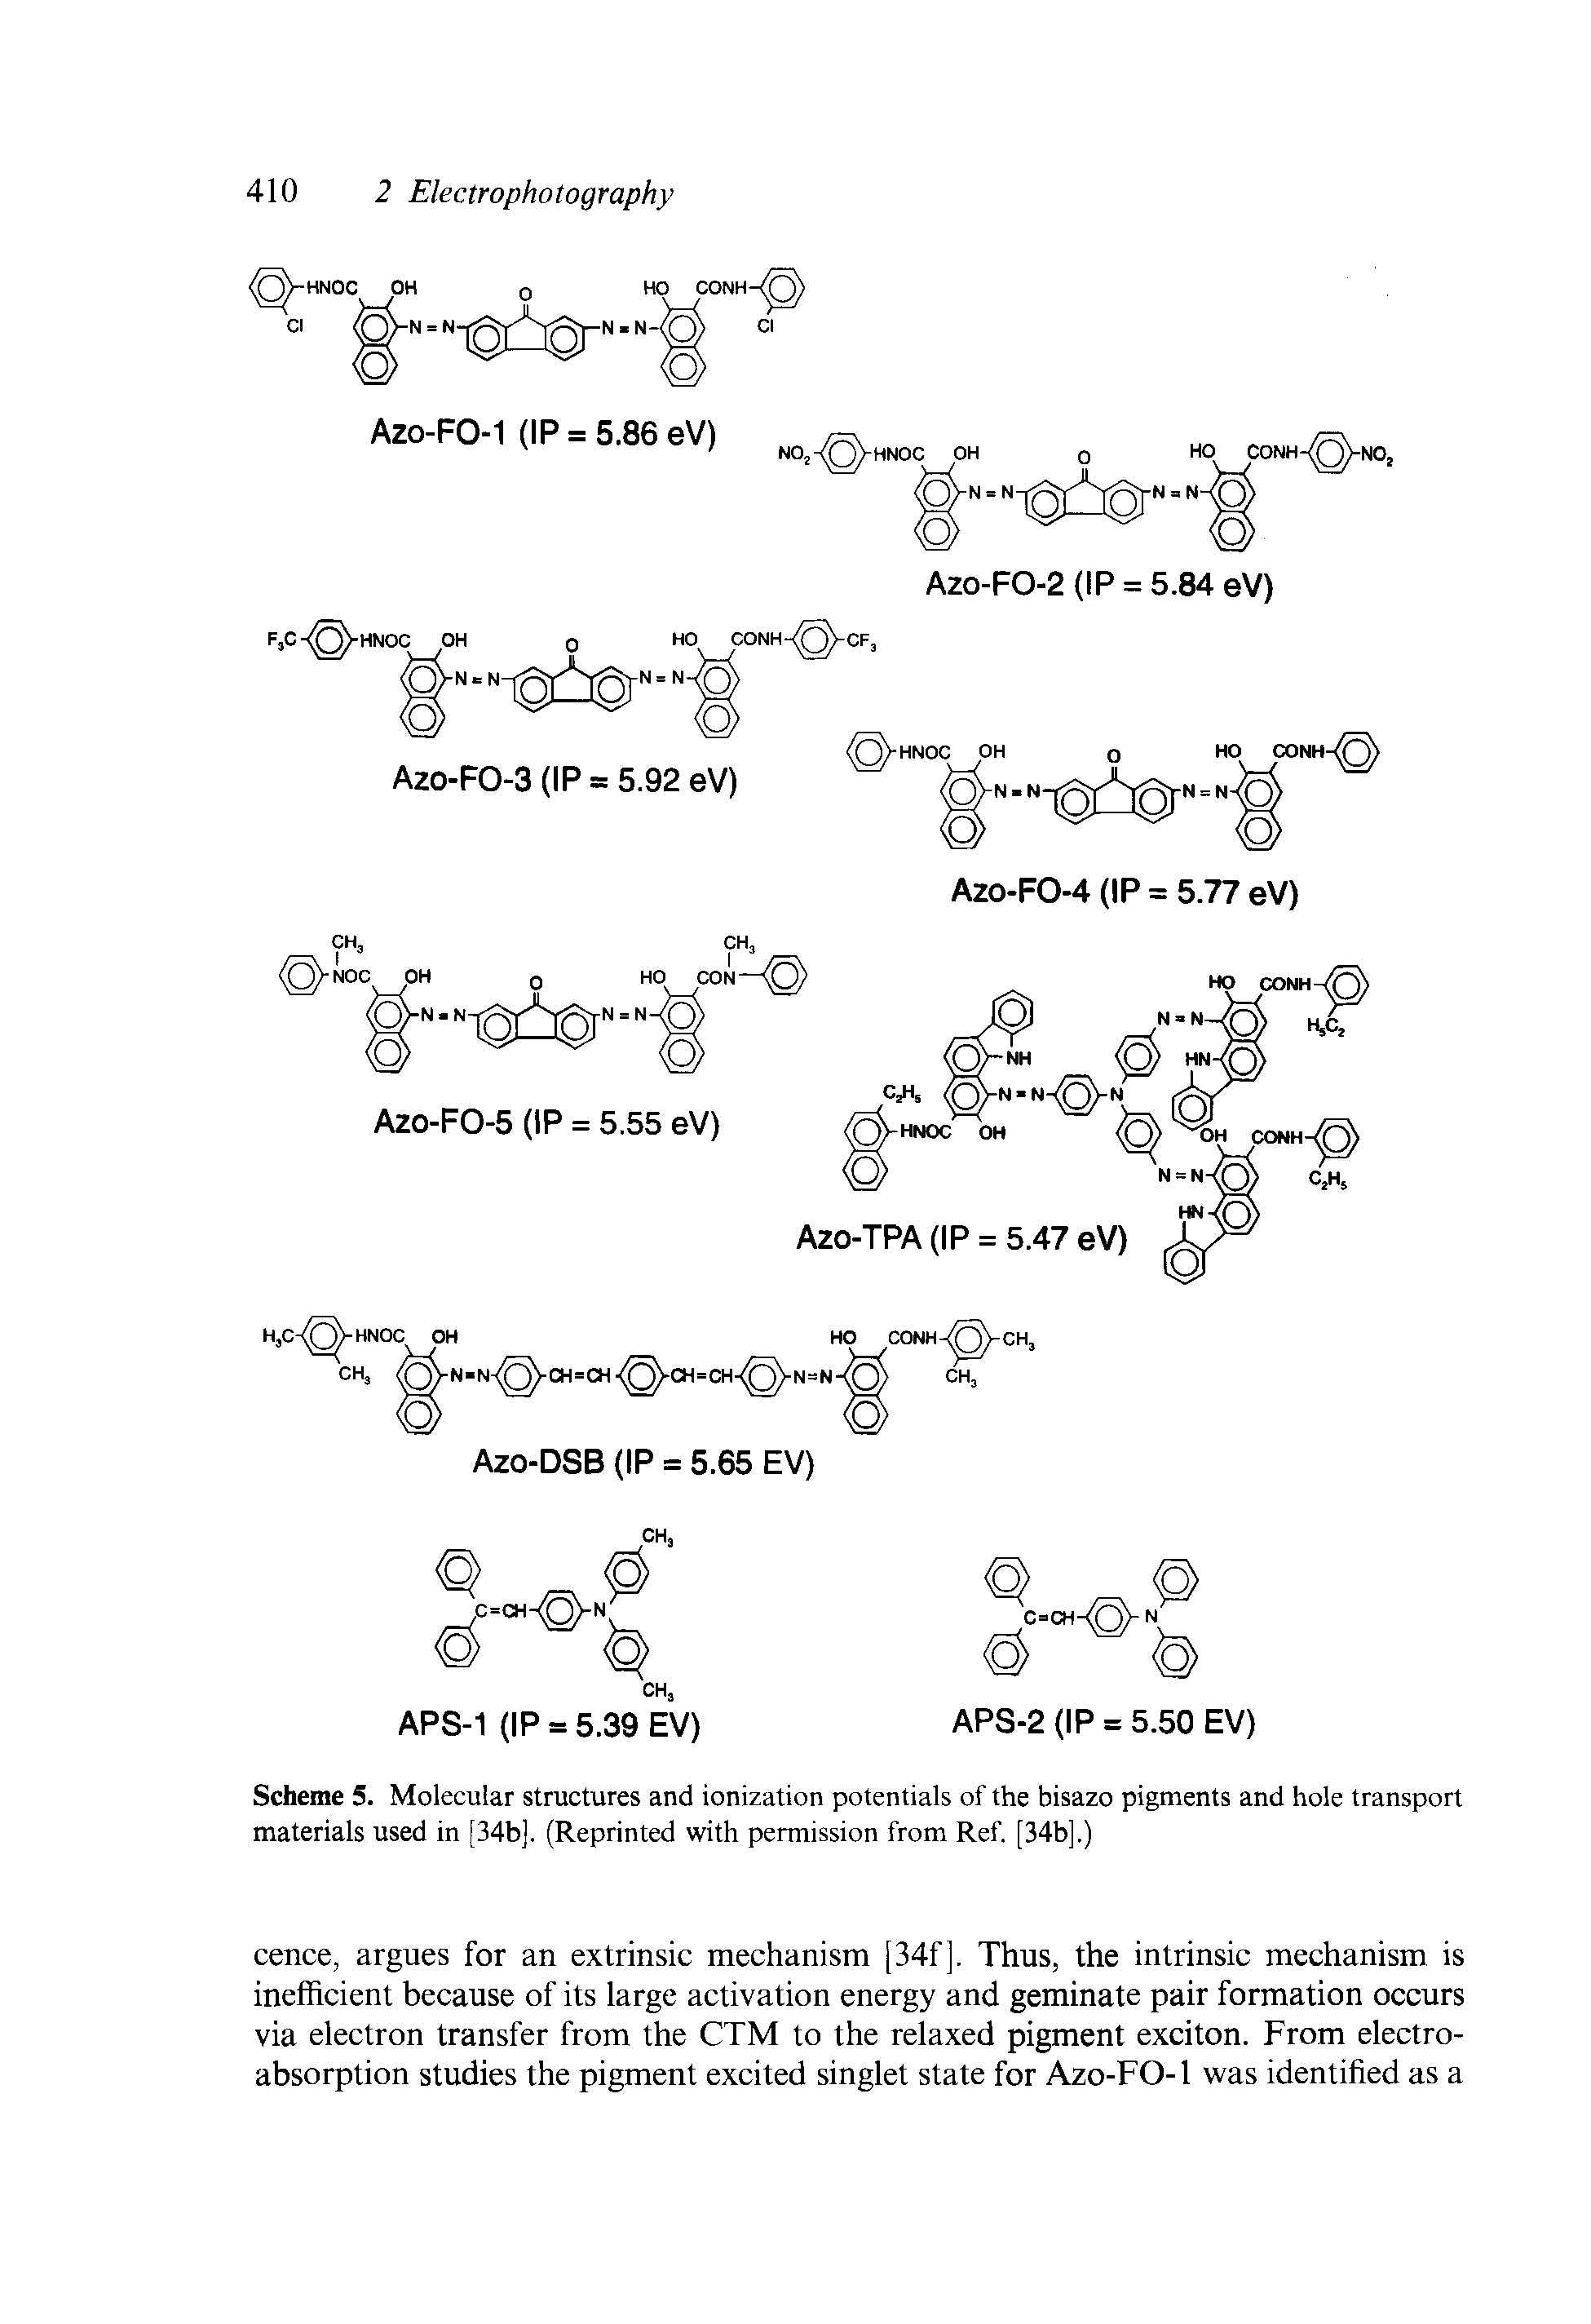 Scheme 5. Molecular structures and ionization potentials of the bisazo pigments and hole transport materials used in [34b], (Reprinted with permission from Ref. [34b].)...